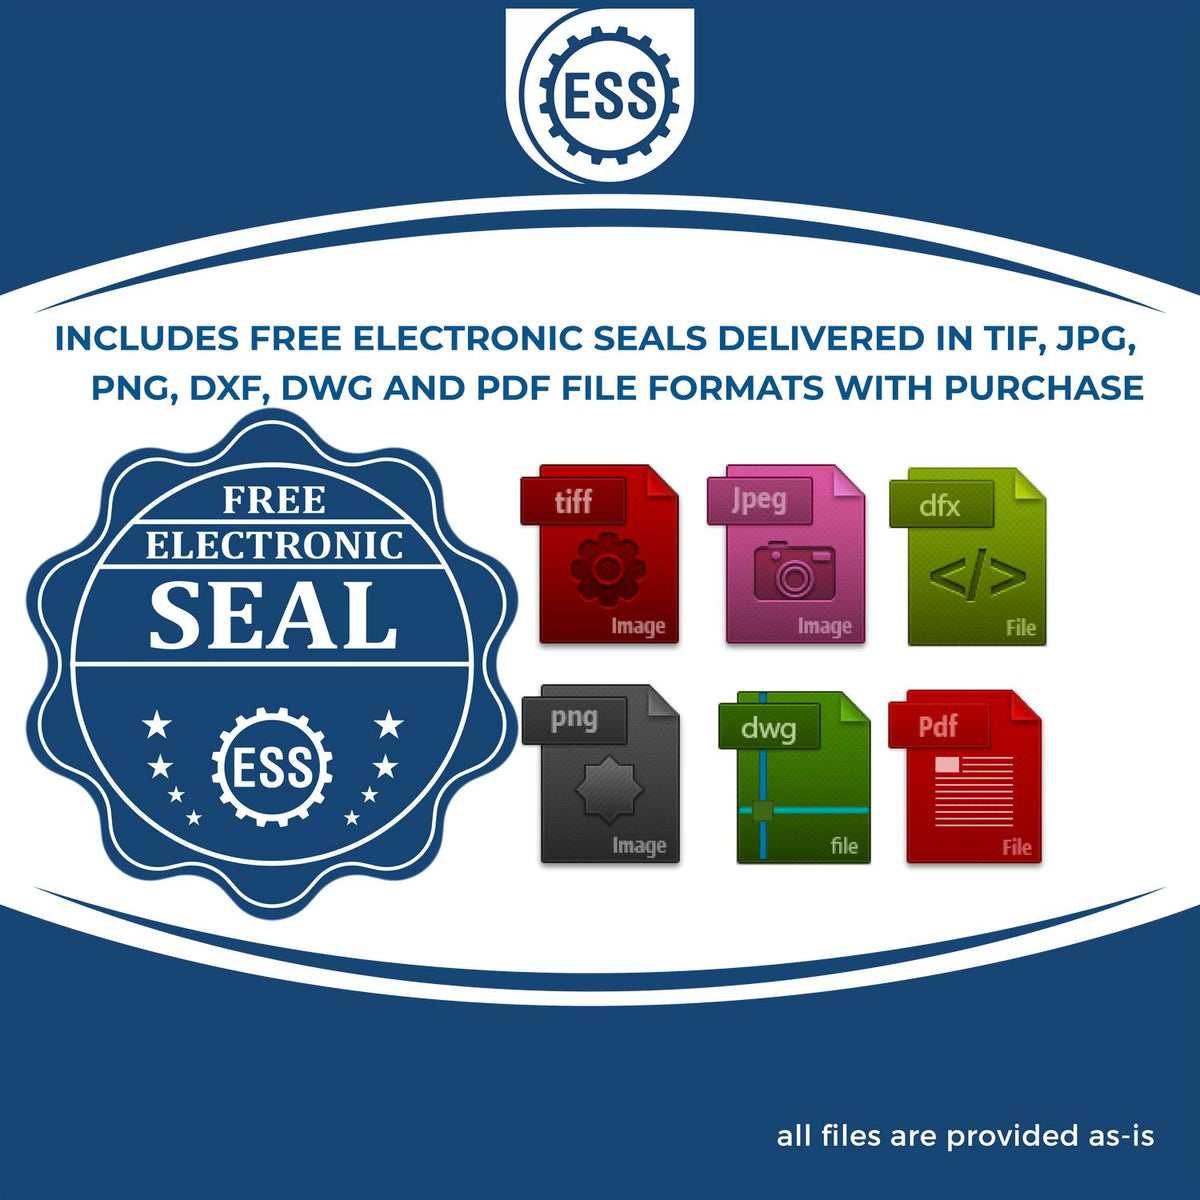 An infographic for the free electronic seal for the Long Reach Indiana Geology Seal illustrating the different file type icons such as DXF, DWG, TIF, JPG and PNG.